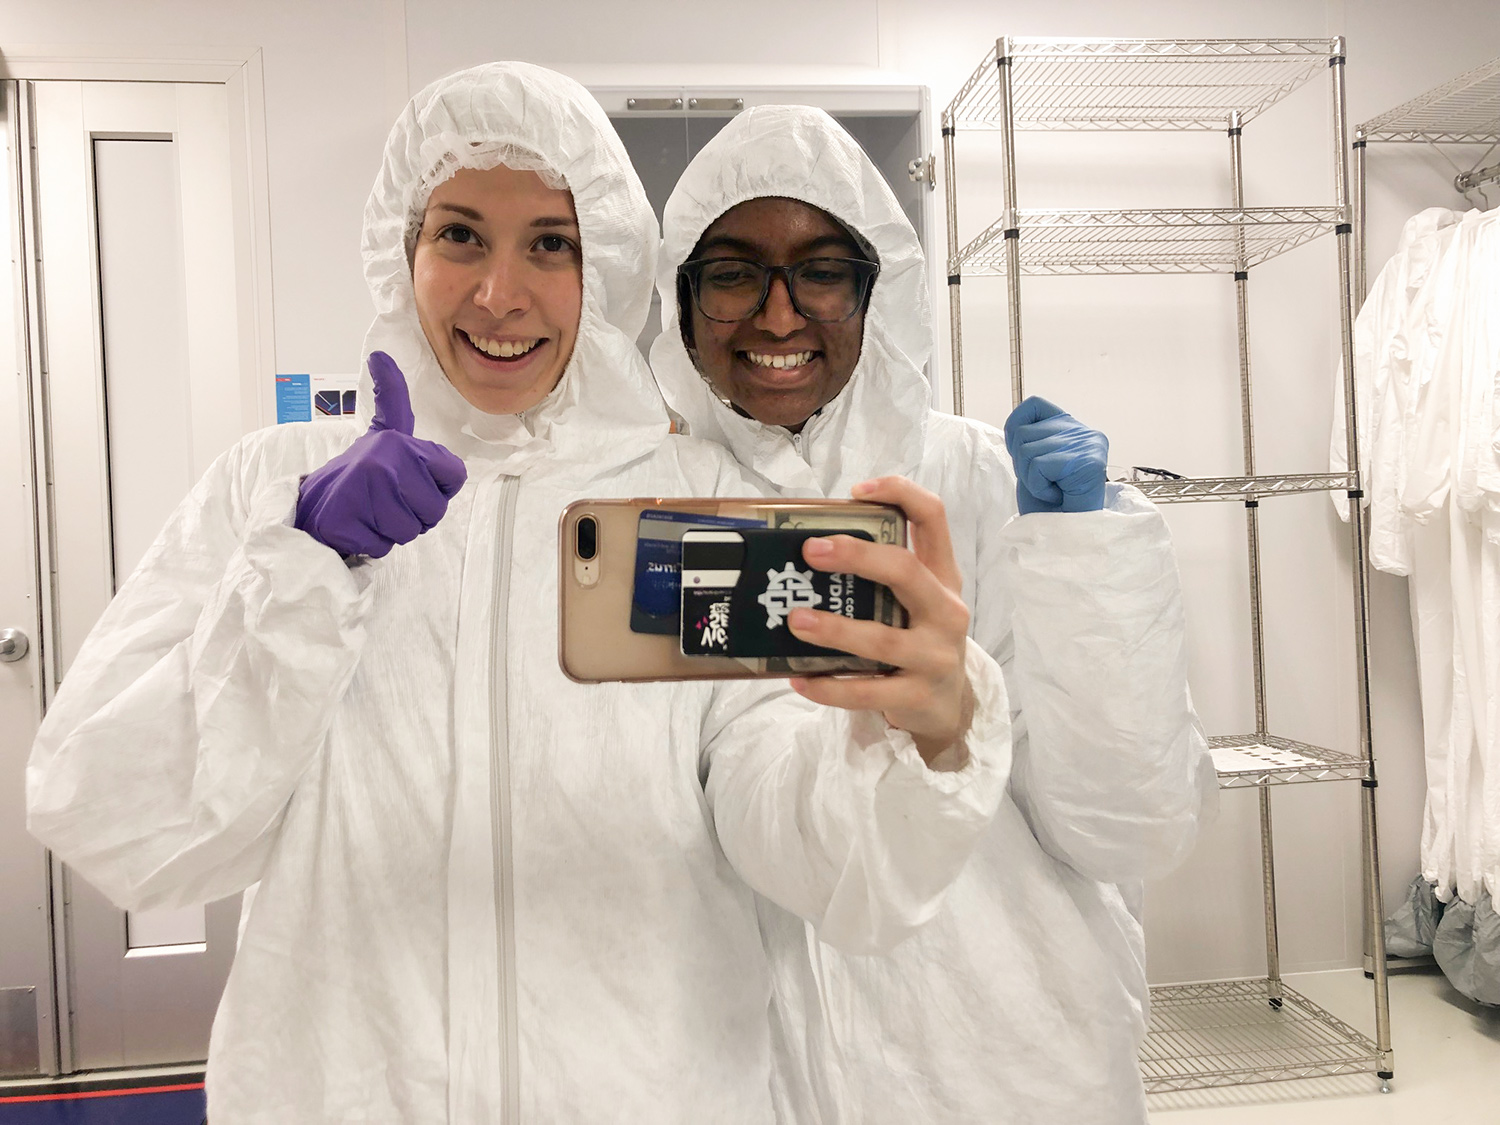 Wear white ‘clean room’ jumpsuits that cover everything but their faces, Daniela Blanco and a dark-skinned woman stand in a lab smiling at the camera. Daniela gives a “thumbs up” with one hand while taking a cellphone self-portrait with each other.